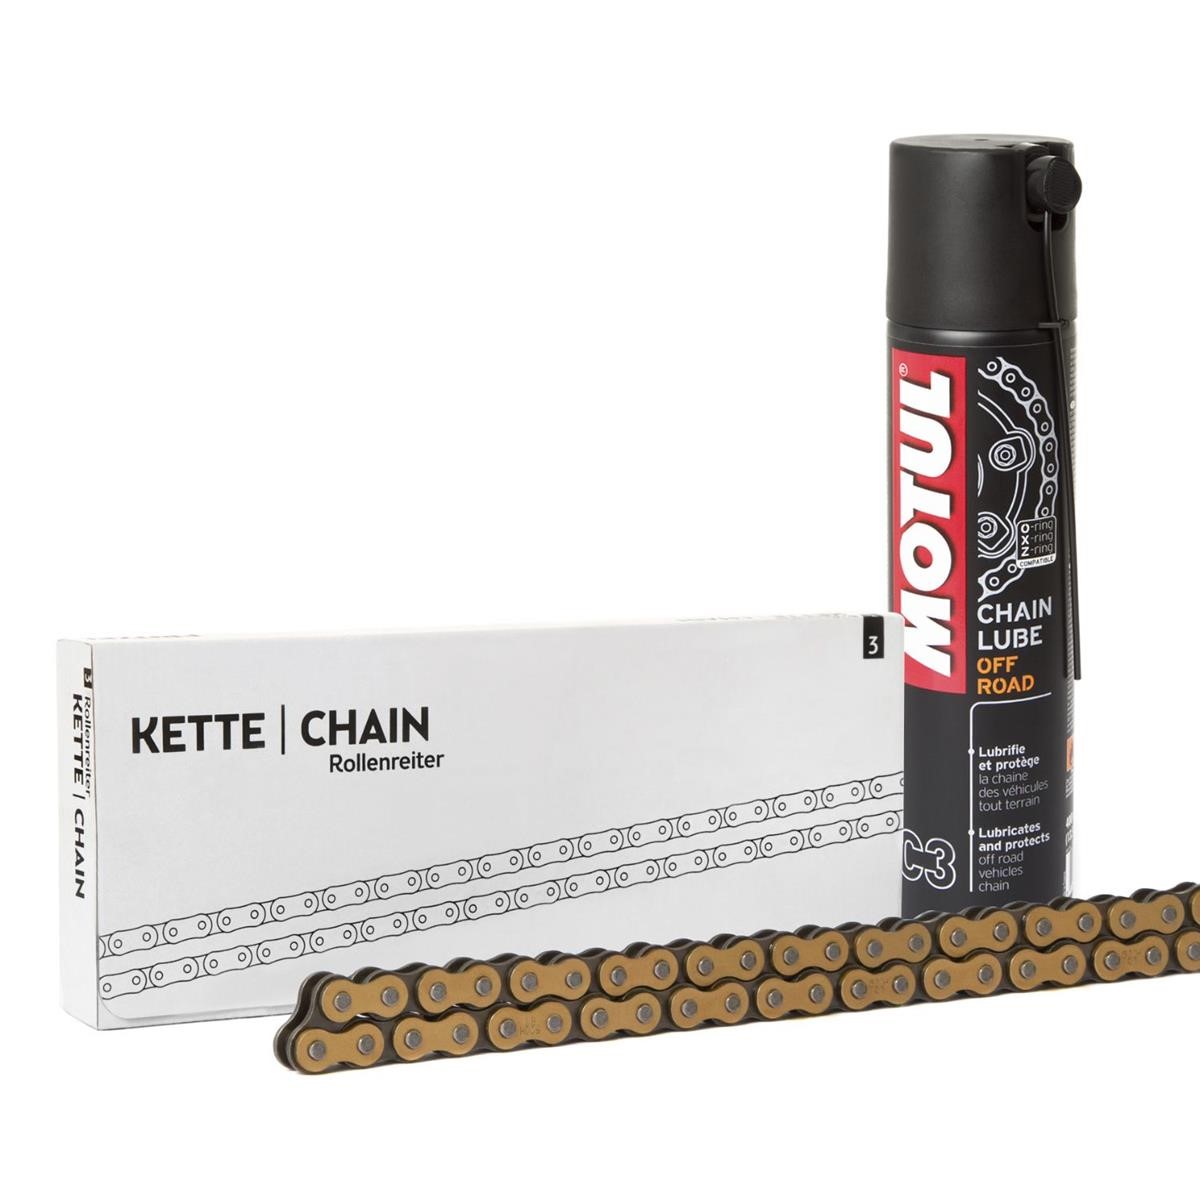 FRITZEL Chain Rollenreiter 520 Pitch, Super Reinforced inkl. Motul Chain Lube 400 ml For Free